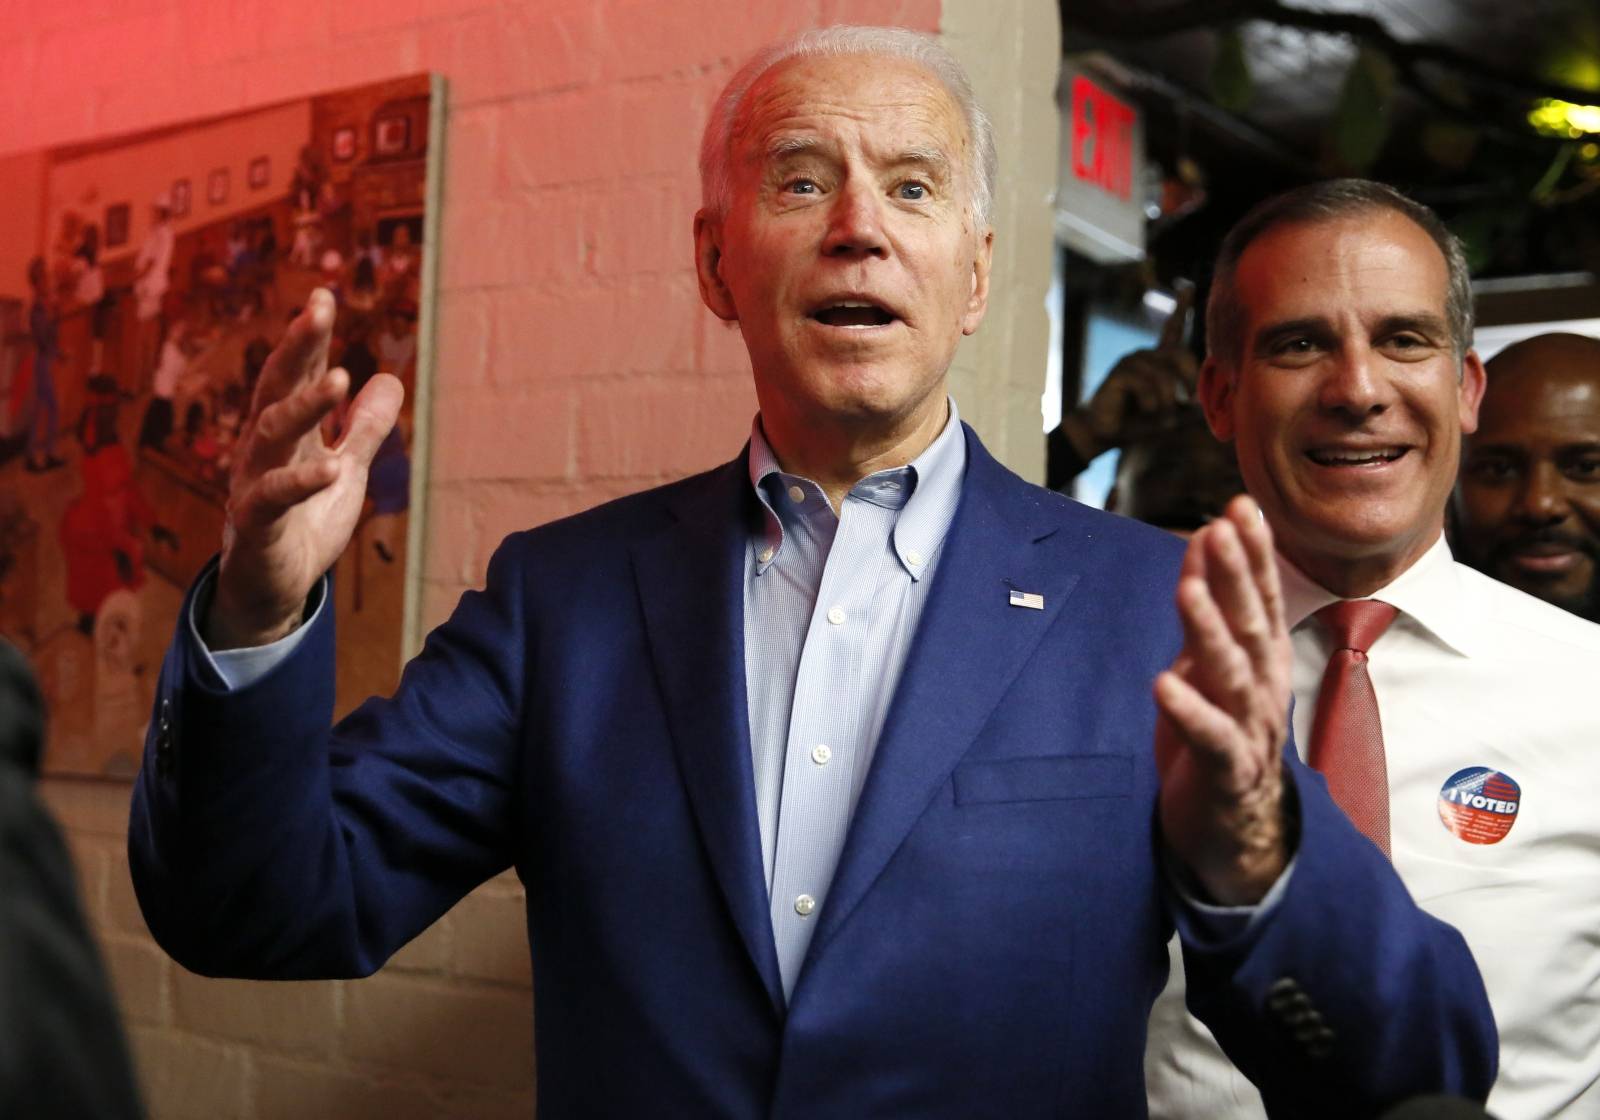 Democratic U.S. presidential candidate and former Vice President Joe Biden campaigns before his Super Tuesday night rally in Los Angeles, California, U.S.